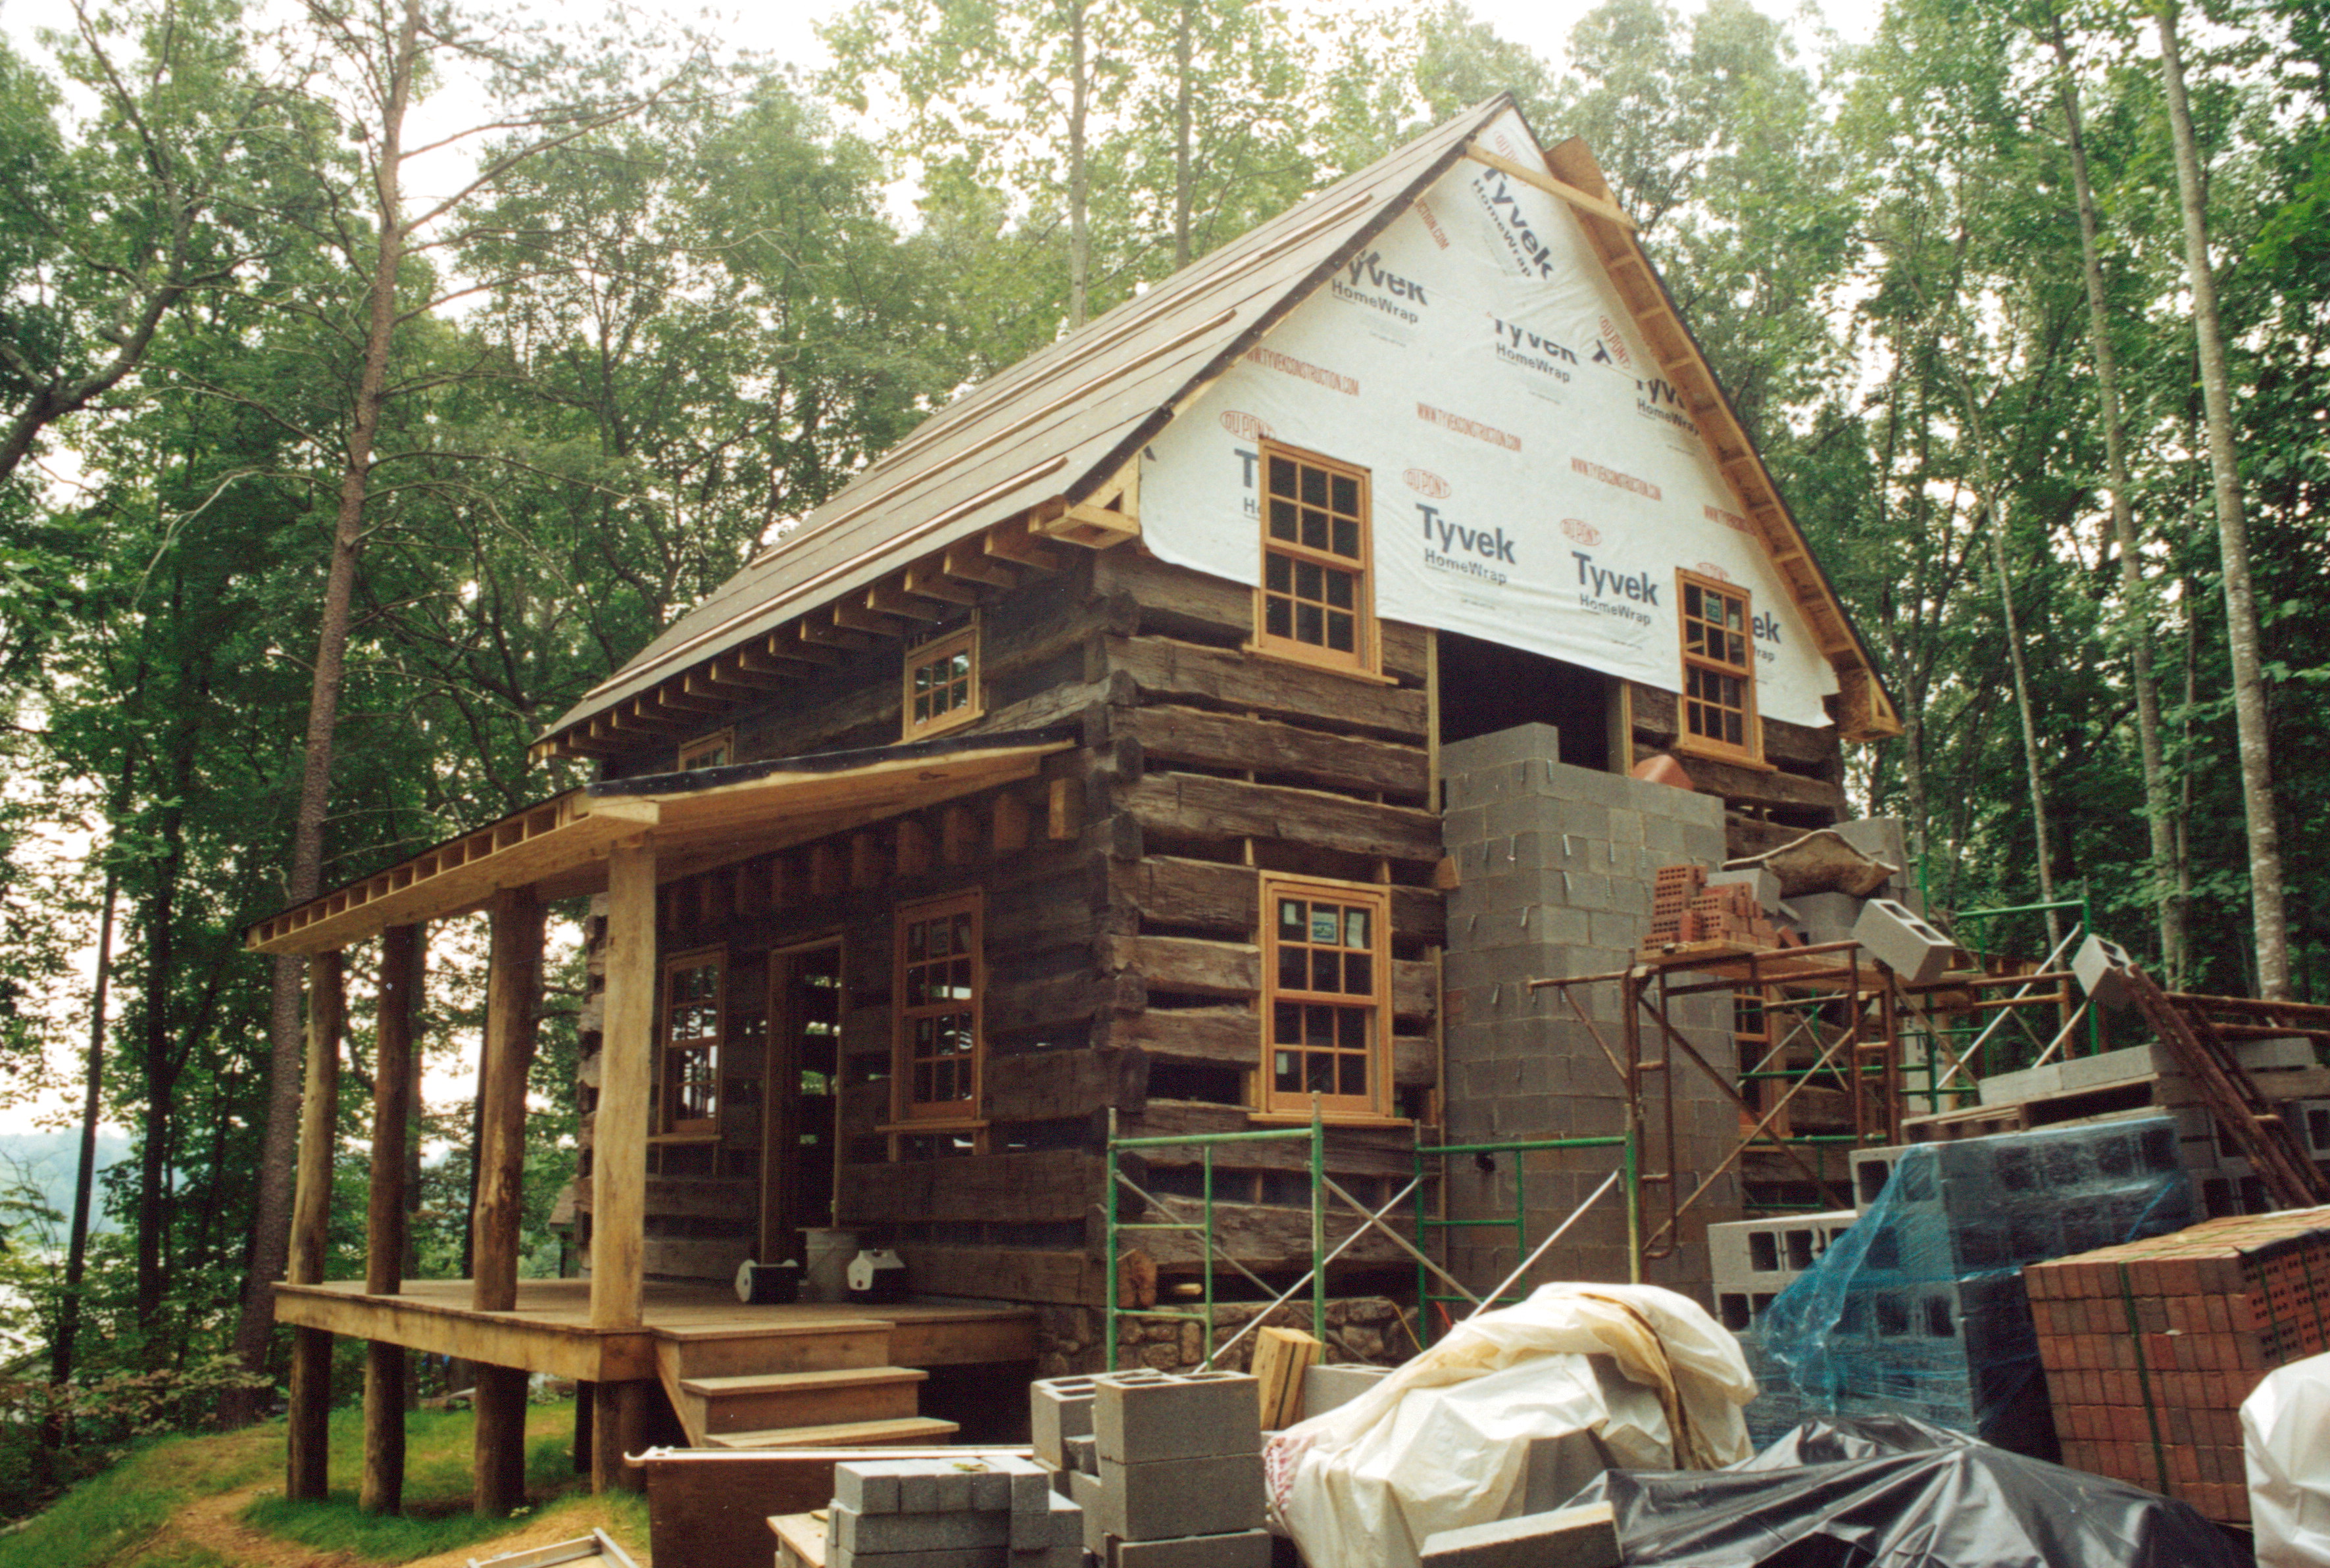 building a log cabin kit yourself